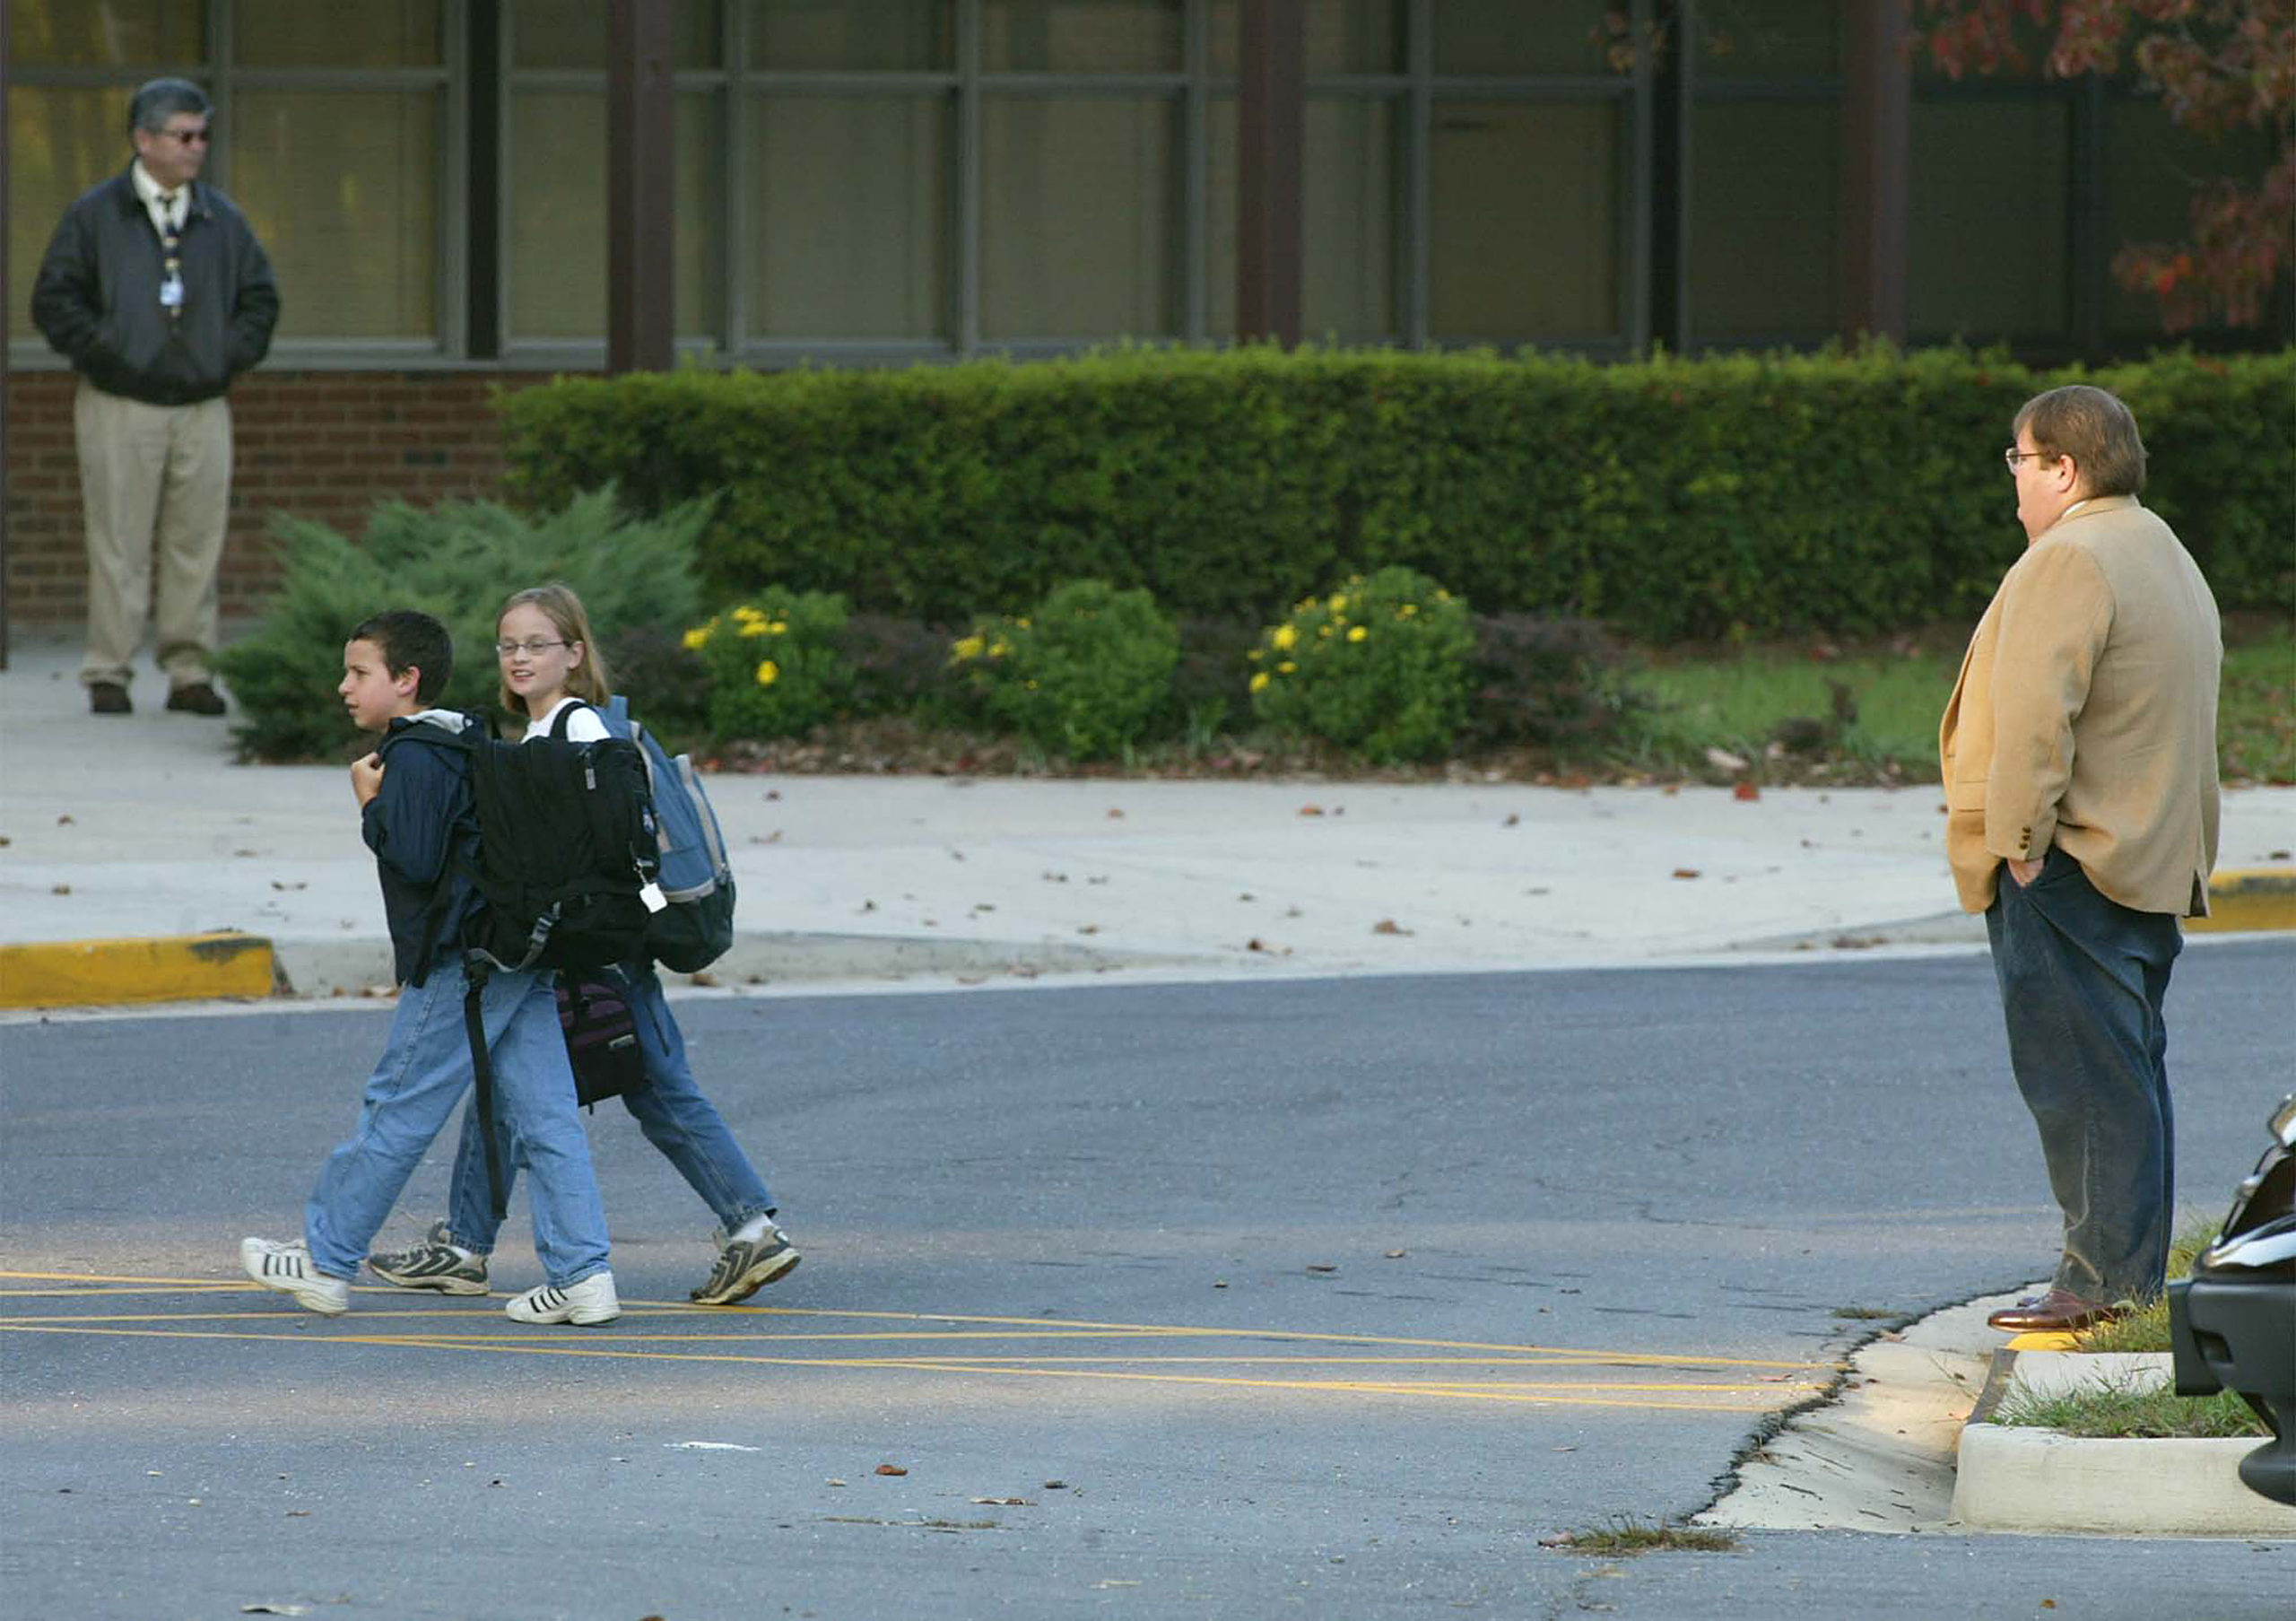 A parent drops off his children at Strathmore Elementry School October 23, 2002 in Aspen Hill, Maryland. Strathmore is located less than a mile from where a bus driver was shot and killed October 23. Montgomery County Police Chief Charles Moose reported to the public that the sniper threathened children in a note. Schools in the area are in a Code Blue lock down mode, banning all outdoor activities. (Photo by Mark Wilson/Getty Images)